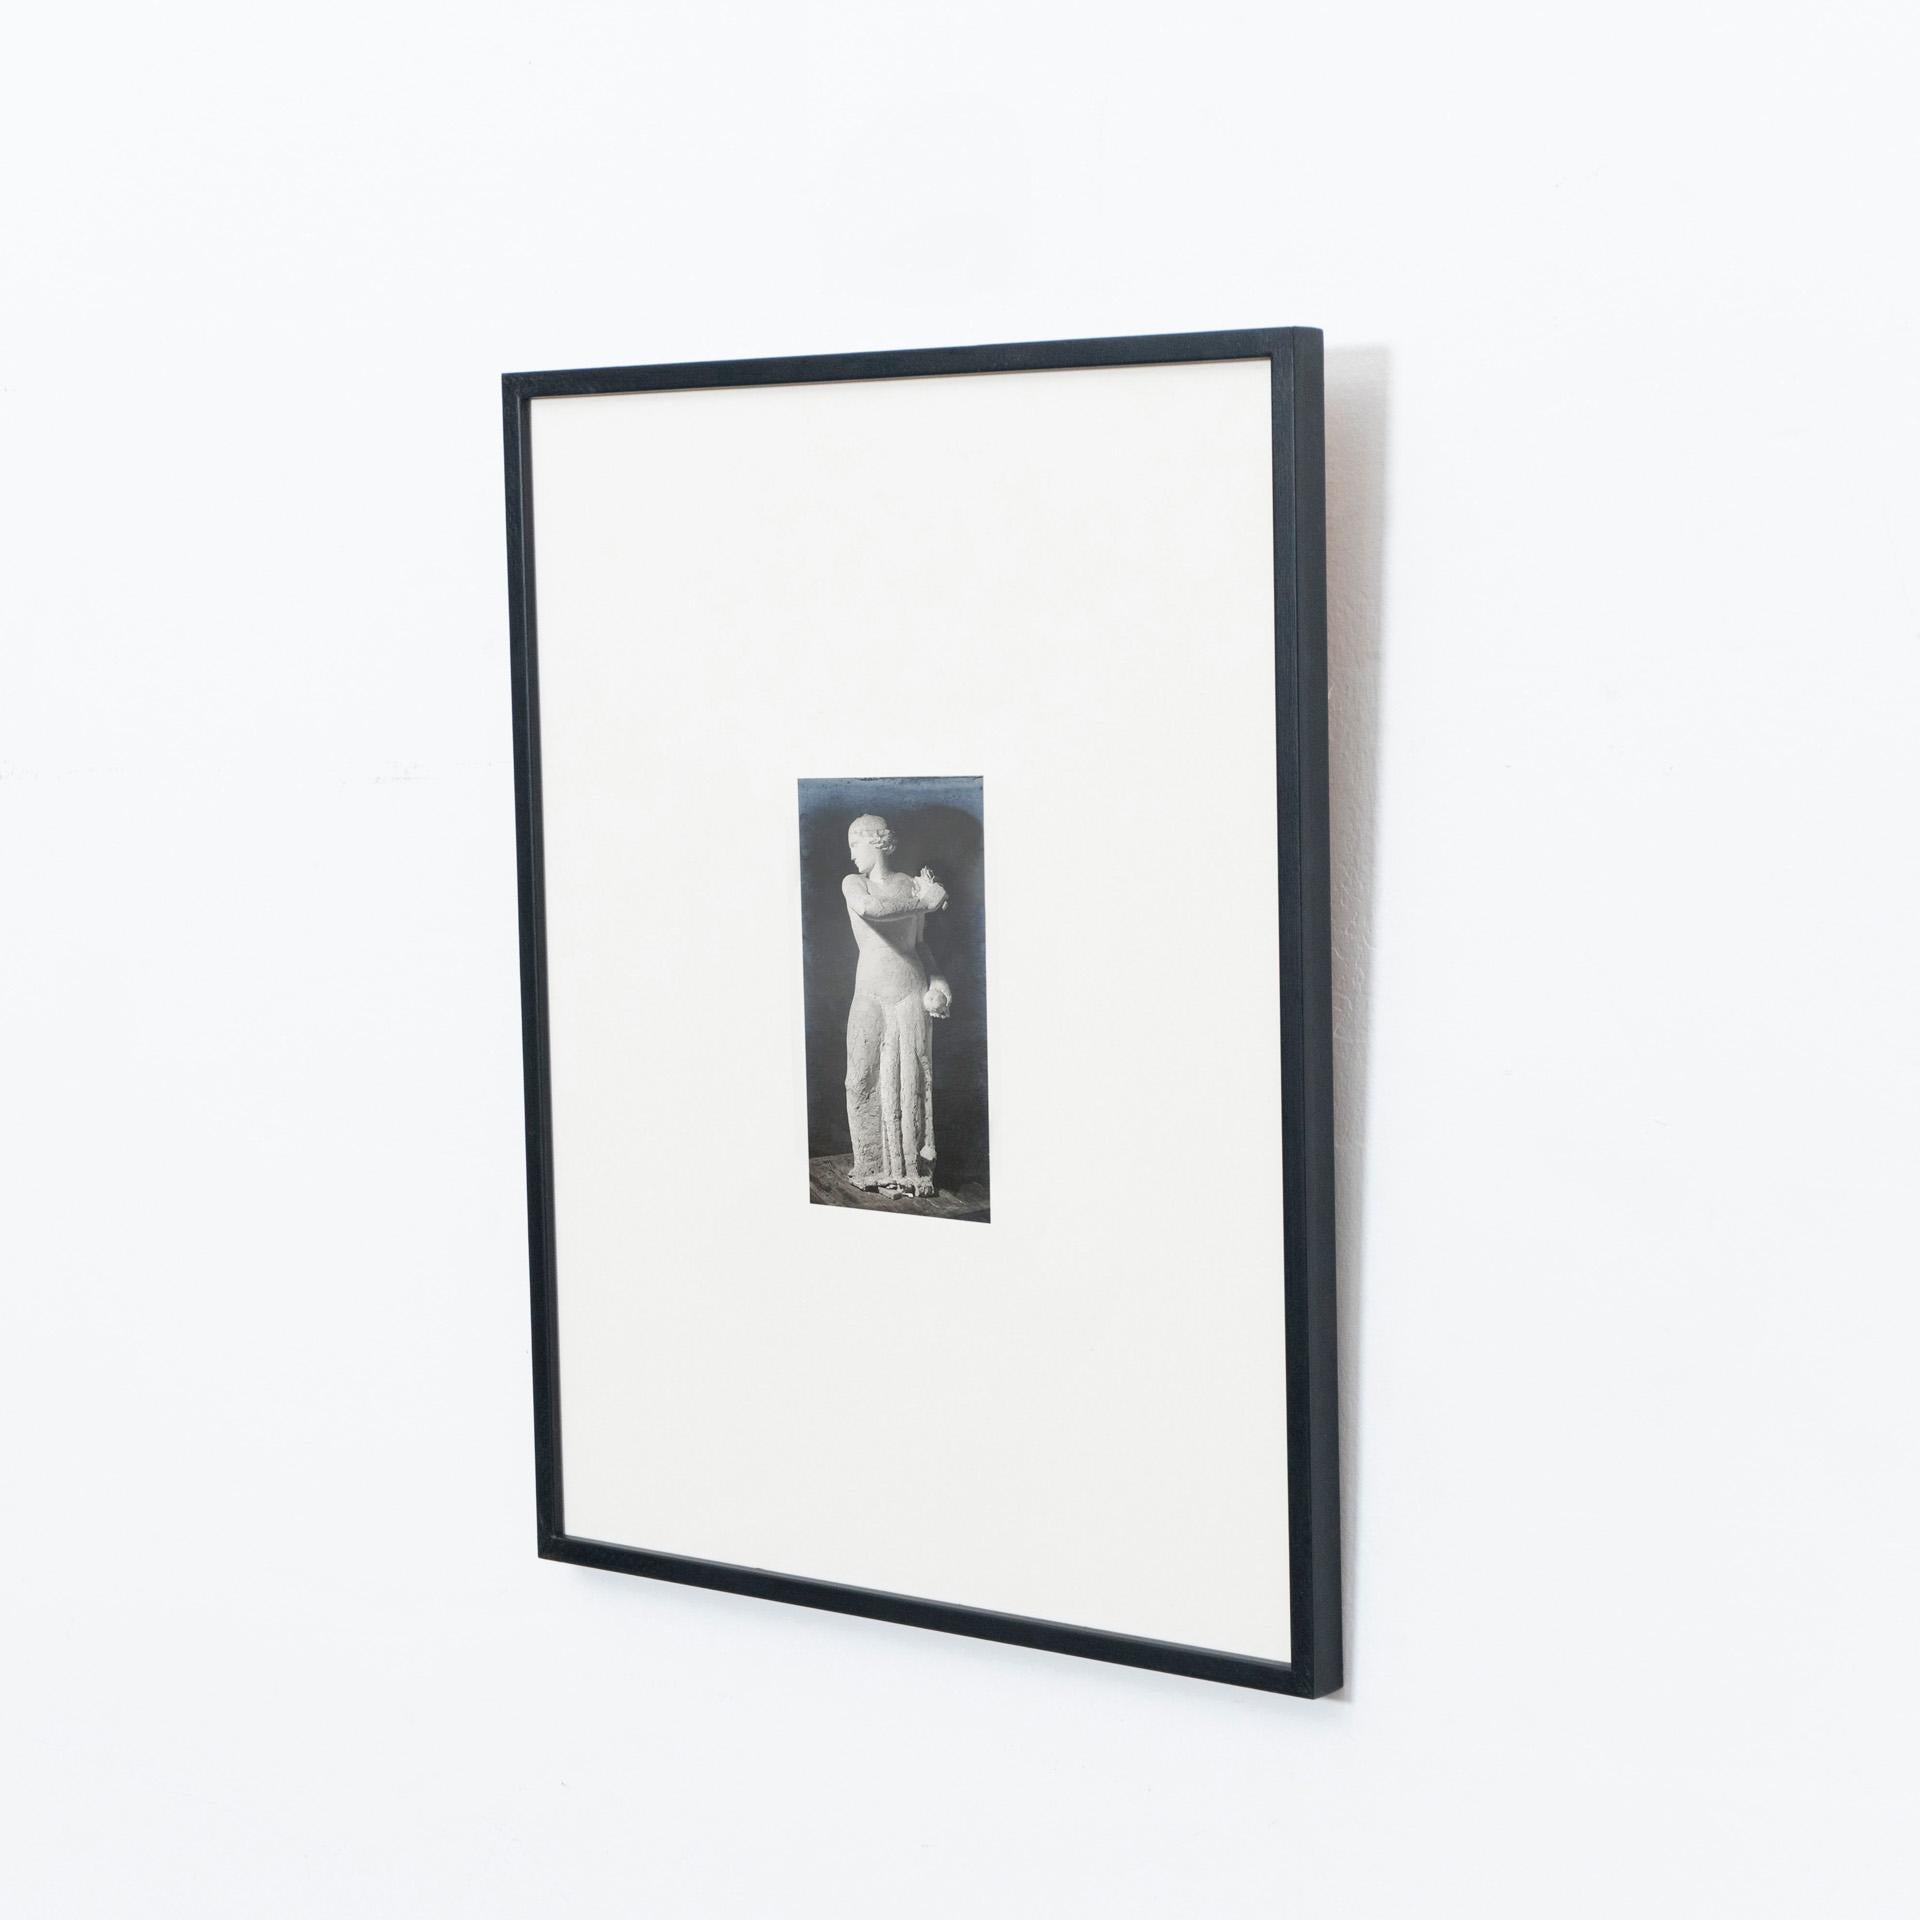 Spanish Manolo Hugue Archive Photography of Sculpture, circa 1960 For Sale